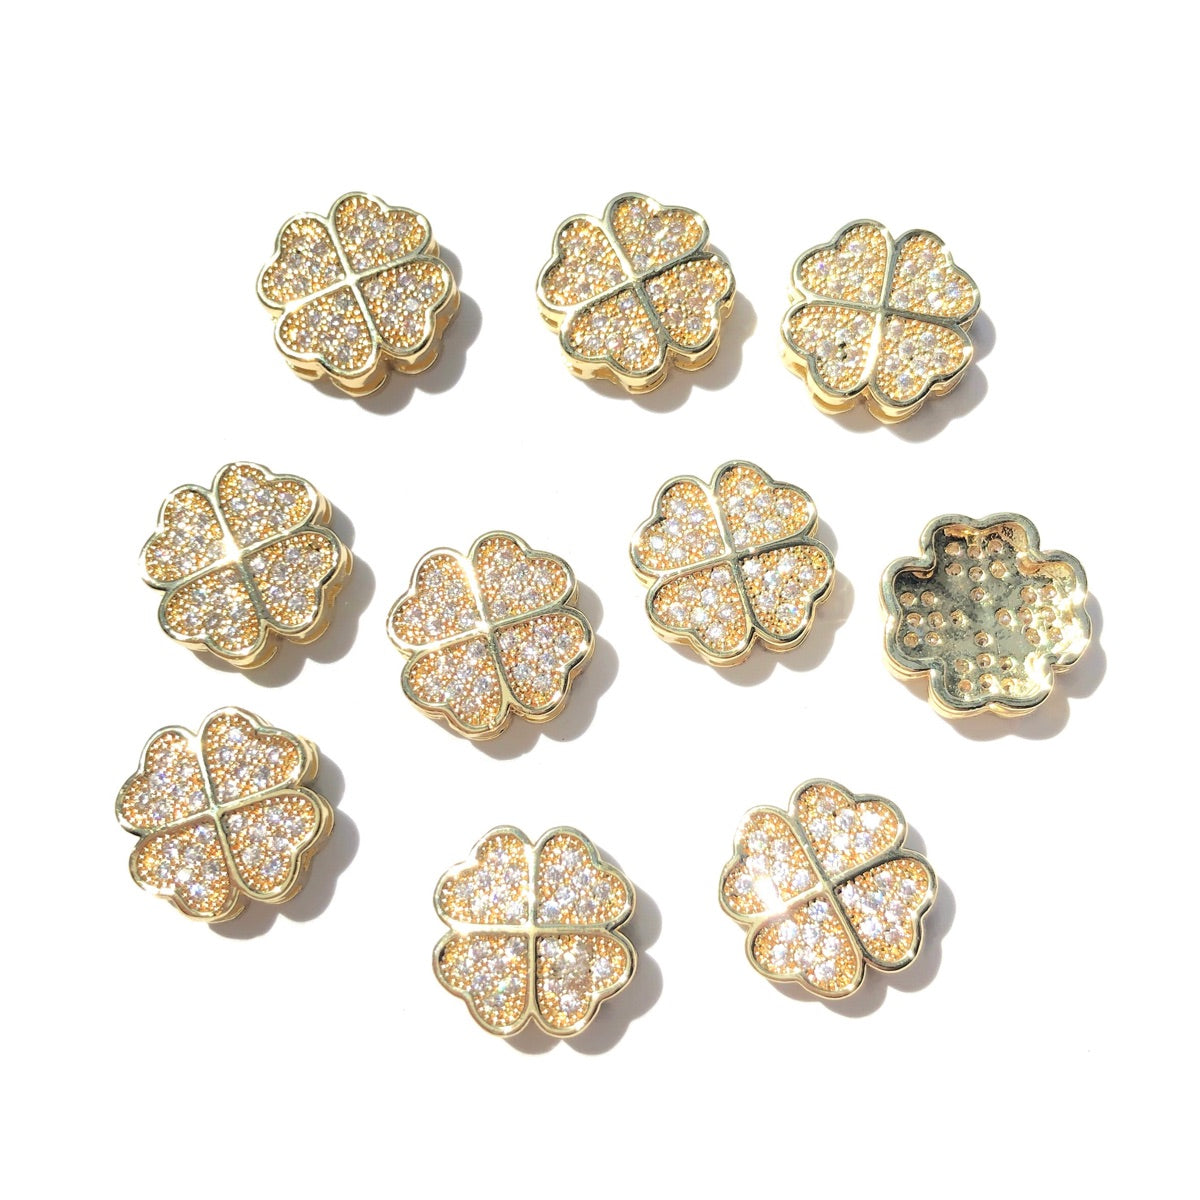 10-20-50pcs/lot 10mm CZ Paved Clover Spacers Gold CZ Paved Spacers Hourglass Beads New Spacers Arrivals Wholesale Charms Beads Beyond